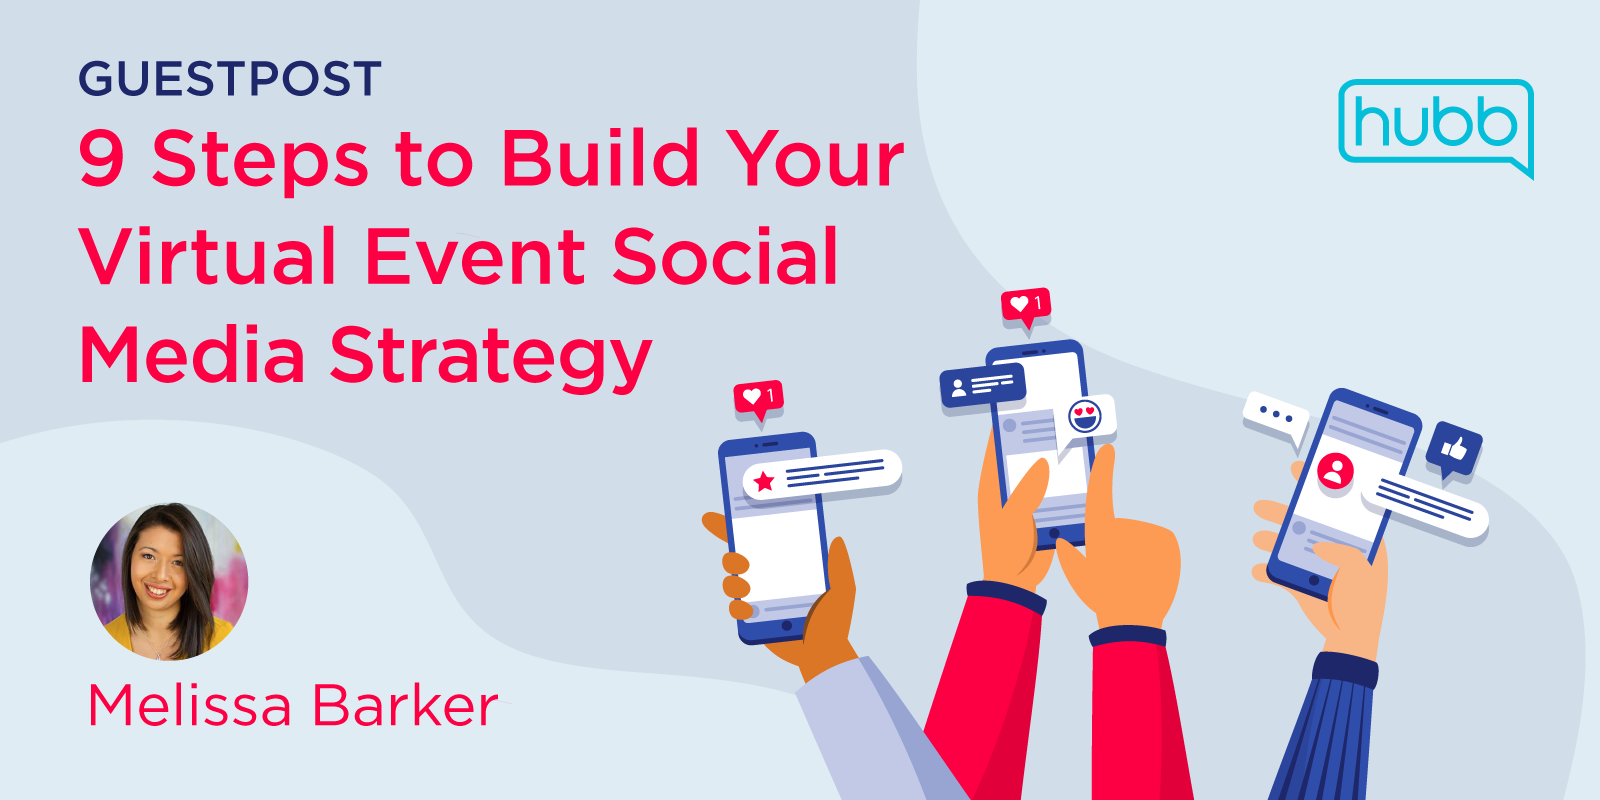 9 Steps to Build Your Virtual Event Social Media Strategy